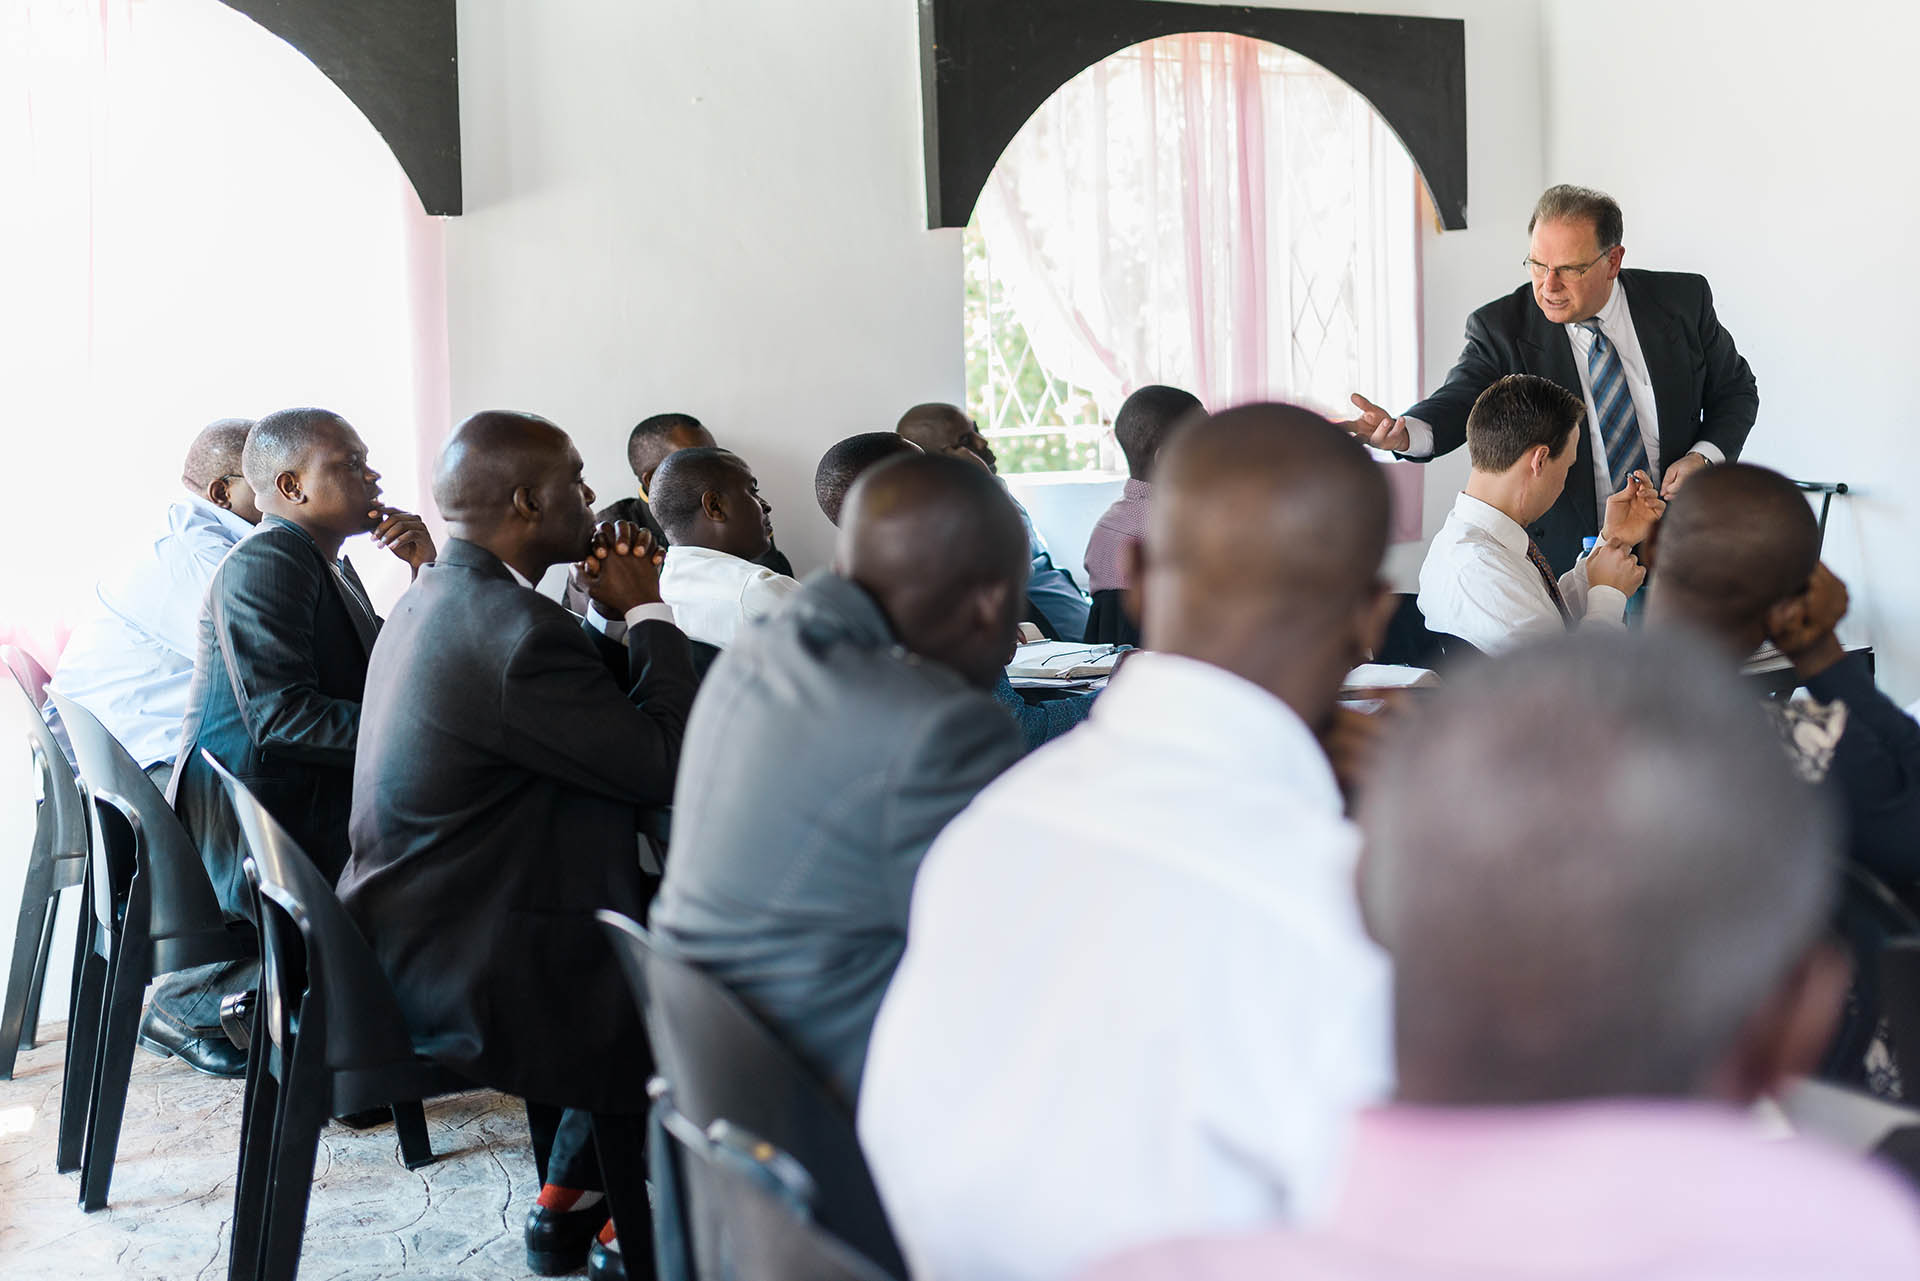 Bishop Gregory Riggen teaching at the ACTS compound in Bulawayo, Zimbabwe to a group of ministers. c.2018